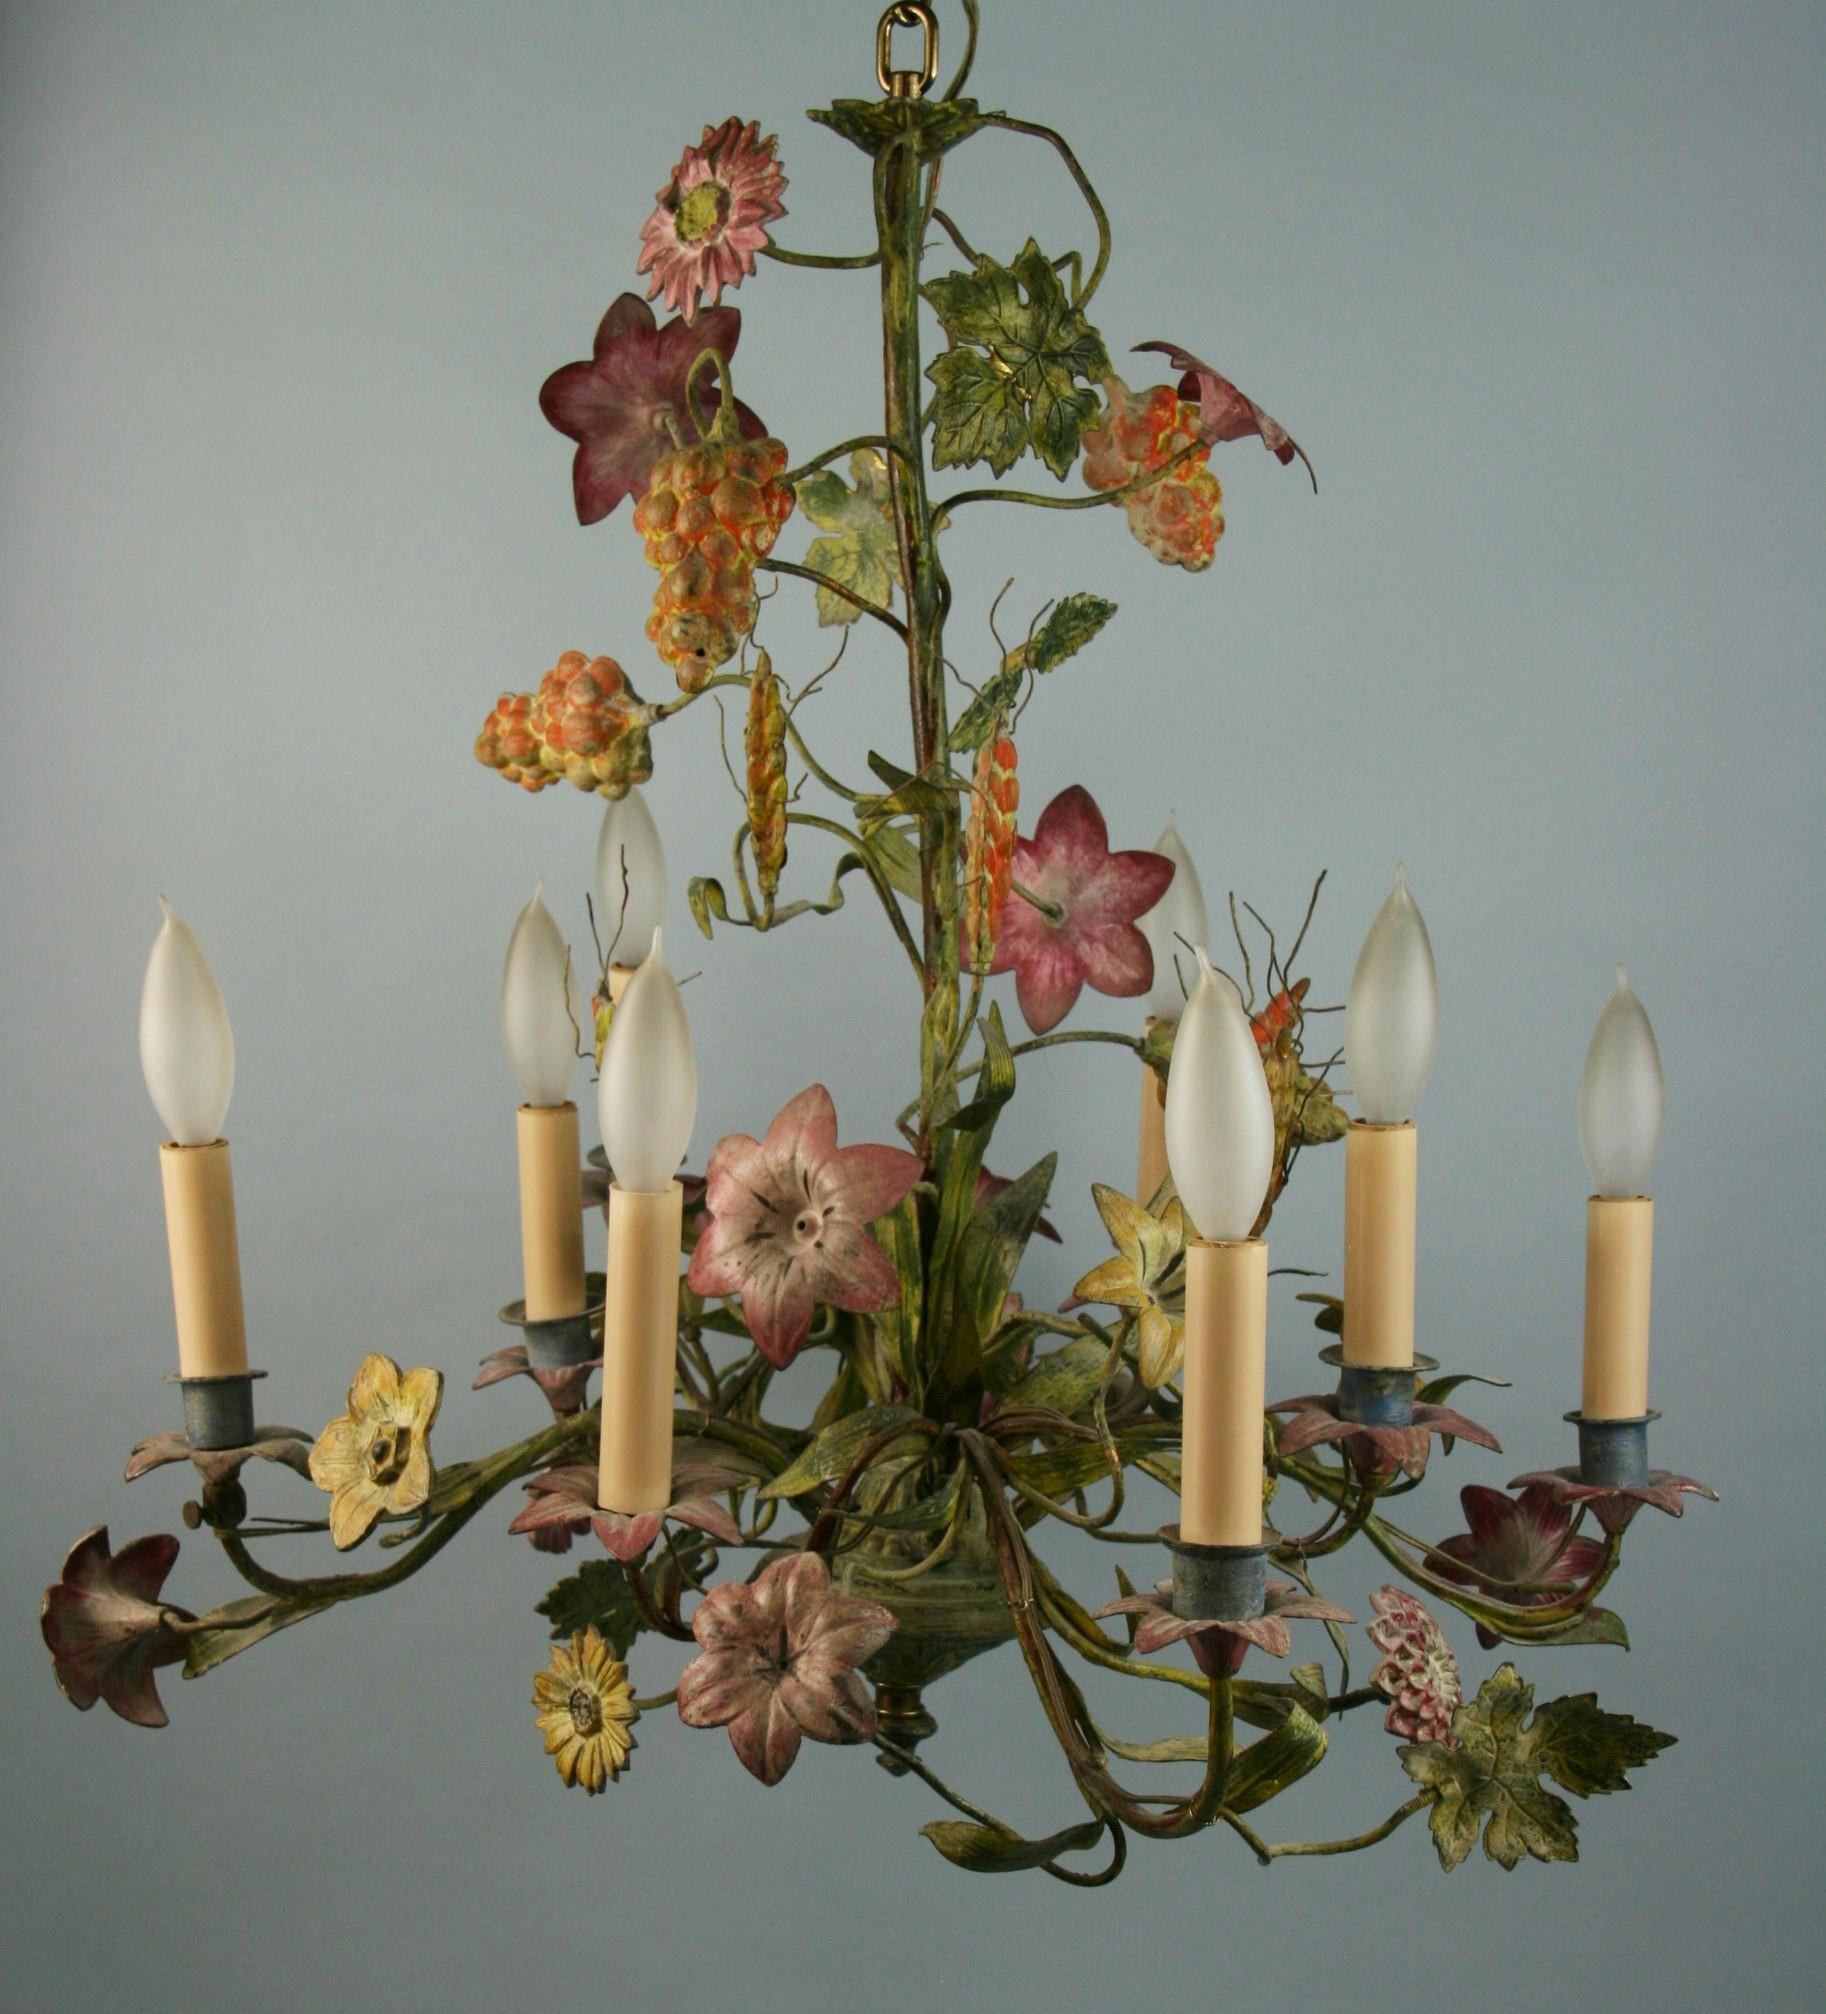 3-515 French hand made and painted 8 light chandelier
Takes 8 candelabra based 40 watt bulbs.
